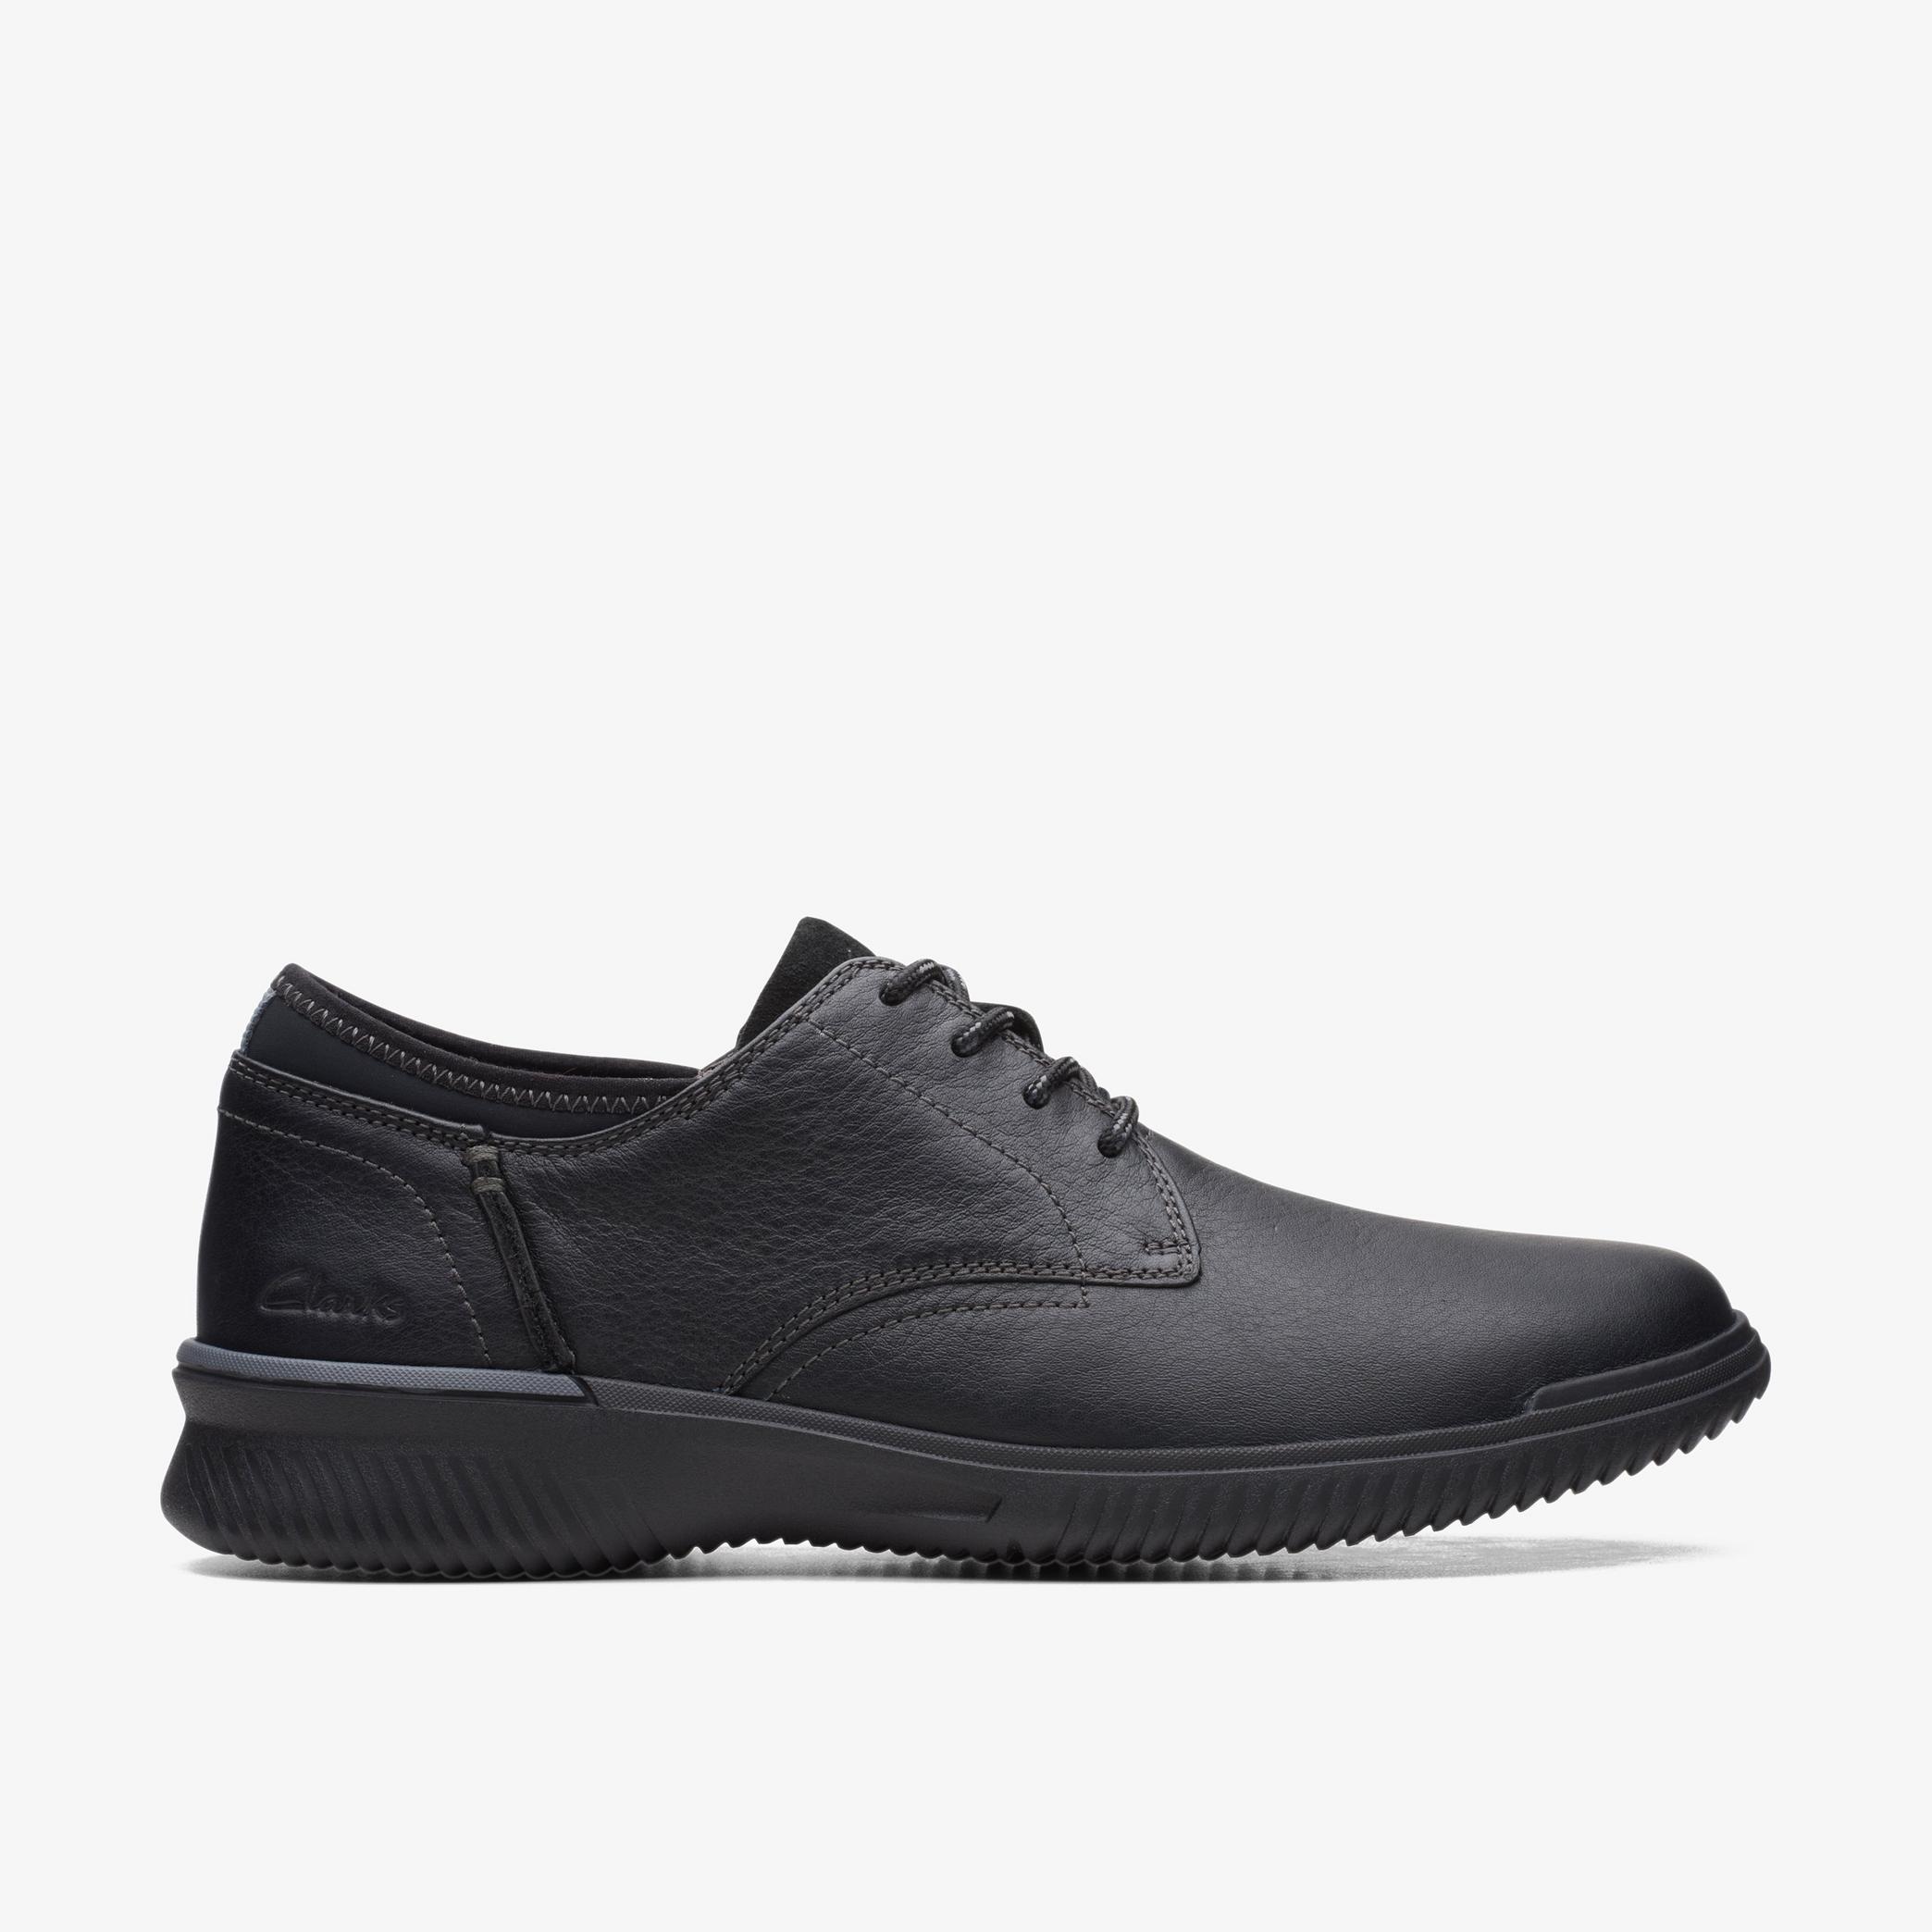 Donaway Plain Black Leather Shoes, view 1 of 6